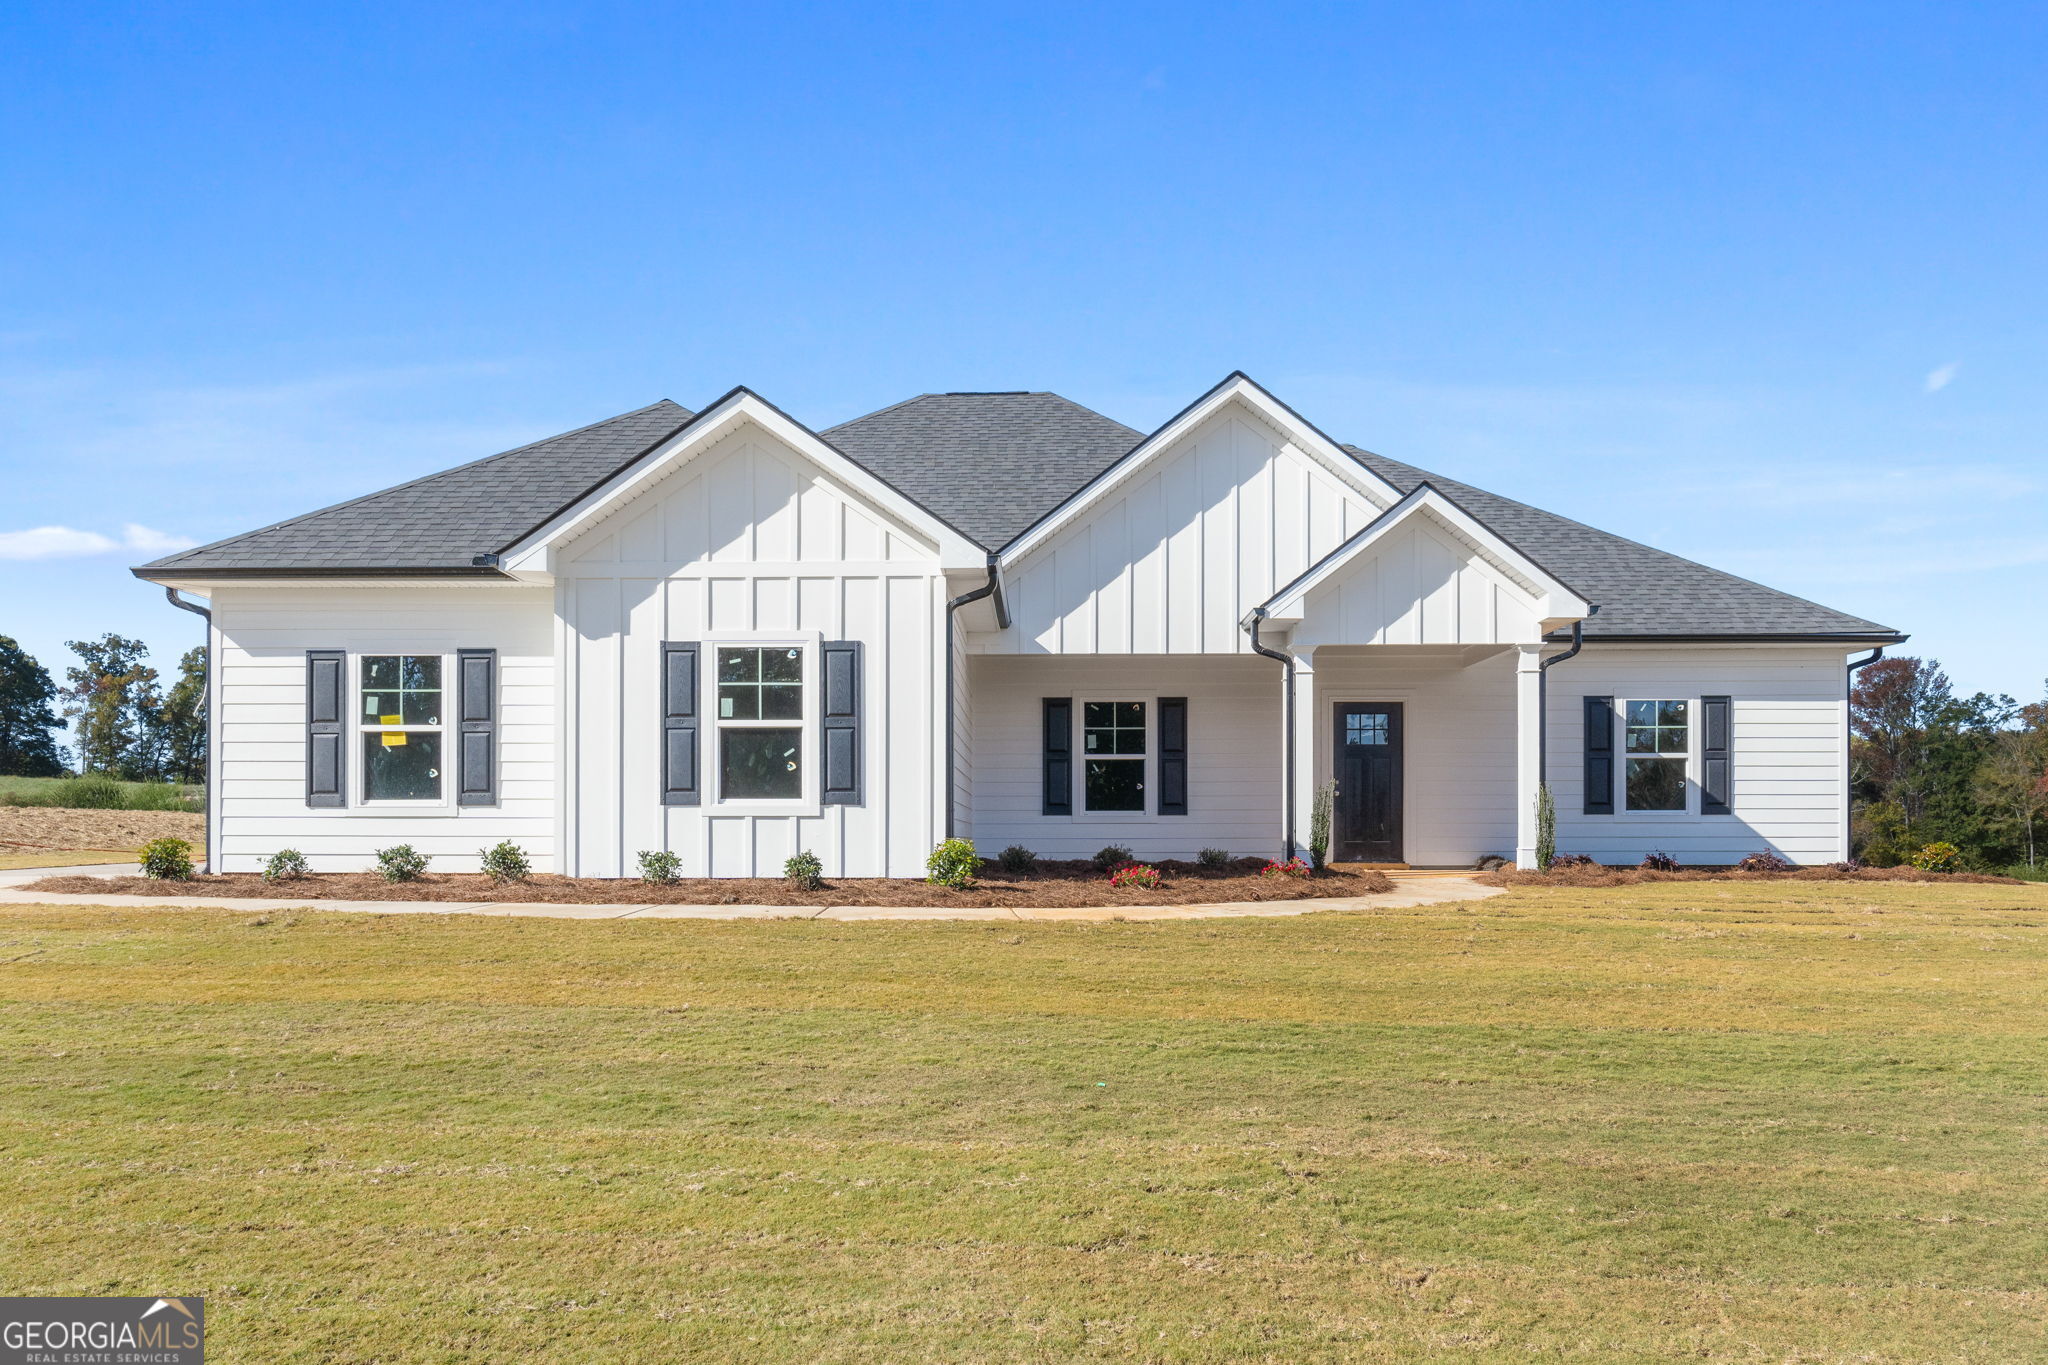 456 Adams Road Meansville, GA 30256 – Pike County New Construction